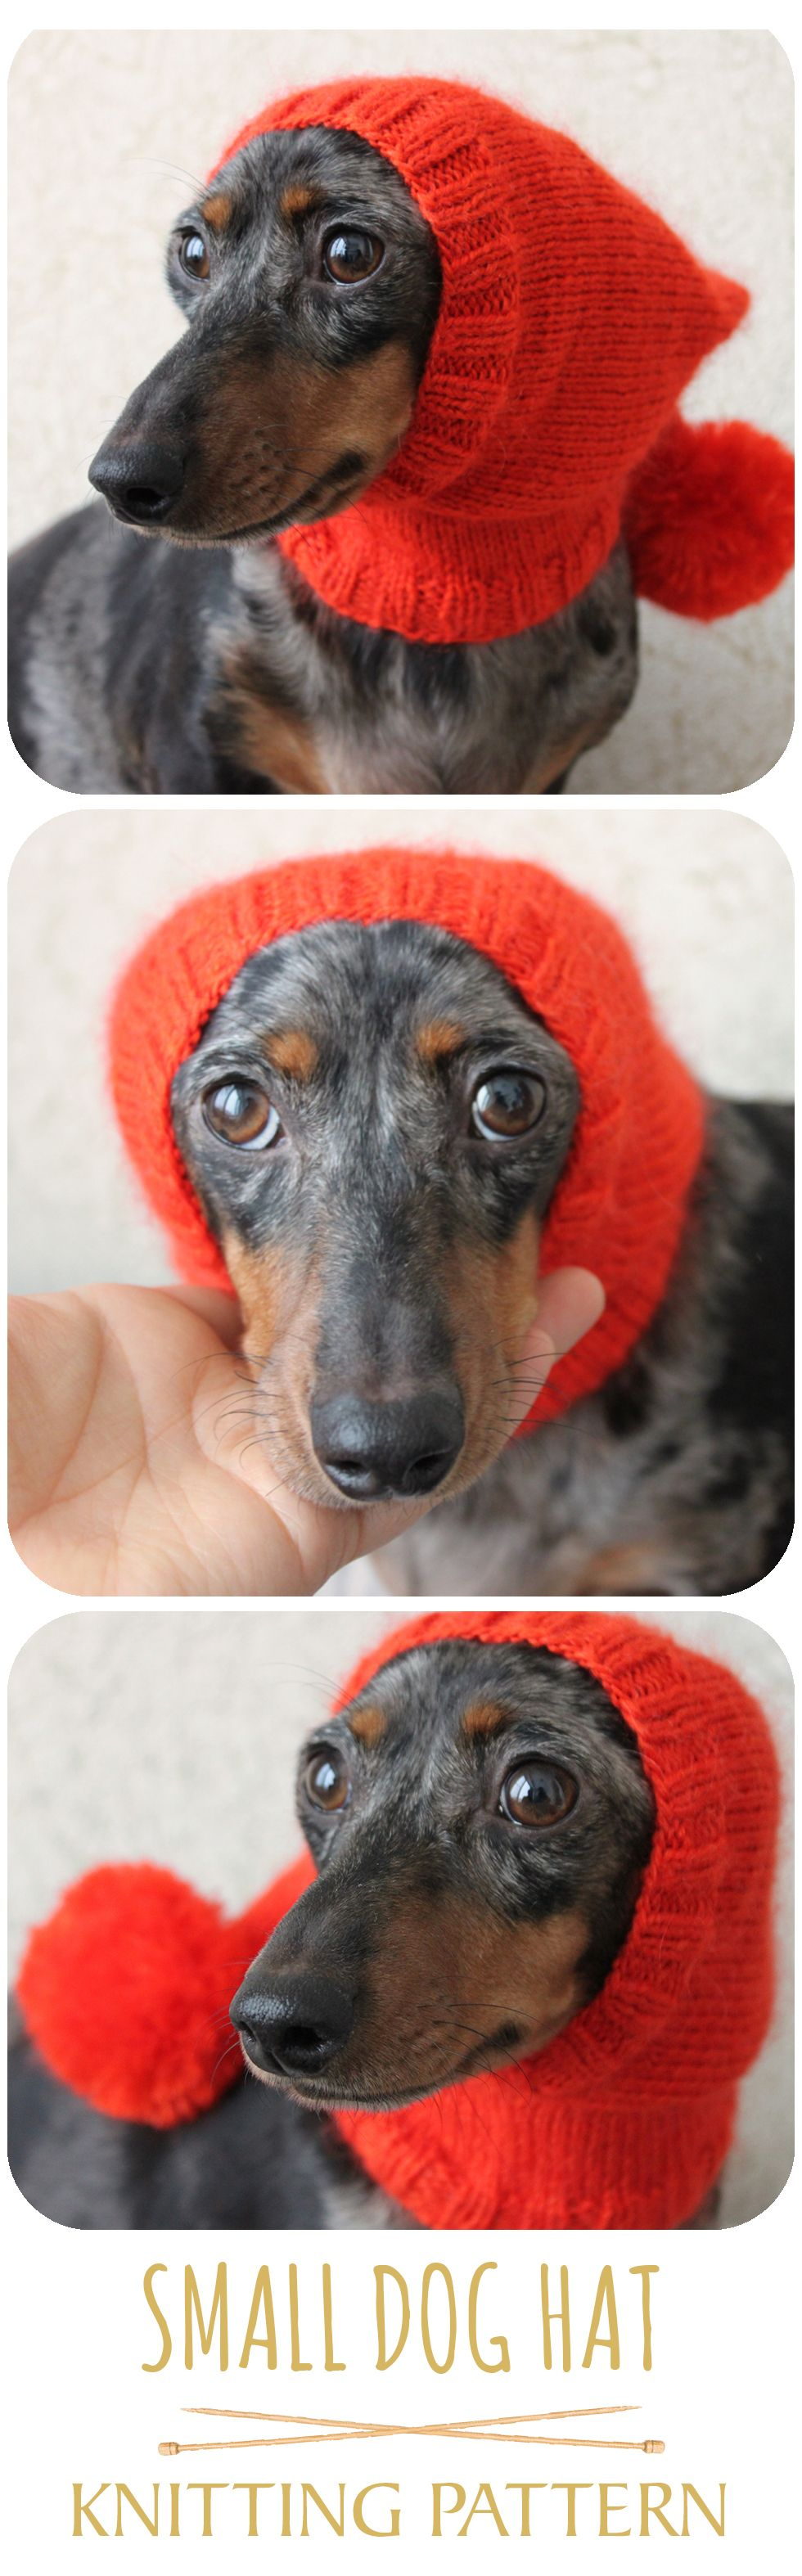 Small Dog Knitting Patterns Hats For Dogs Knitting Patterns